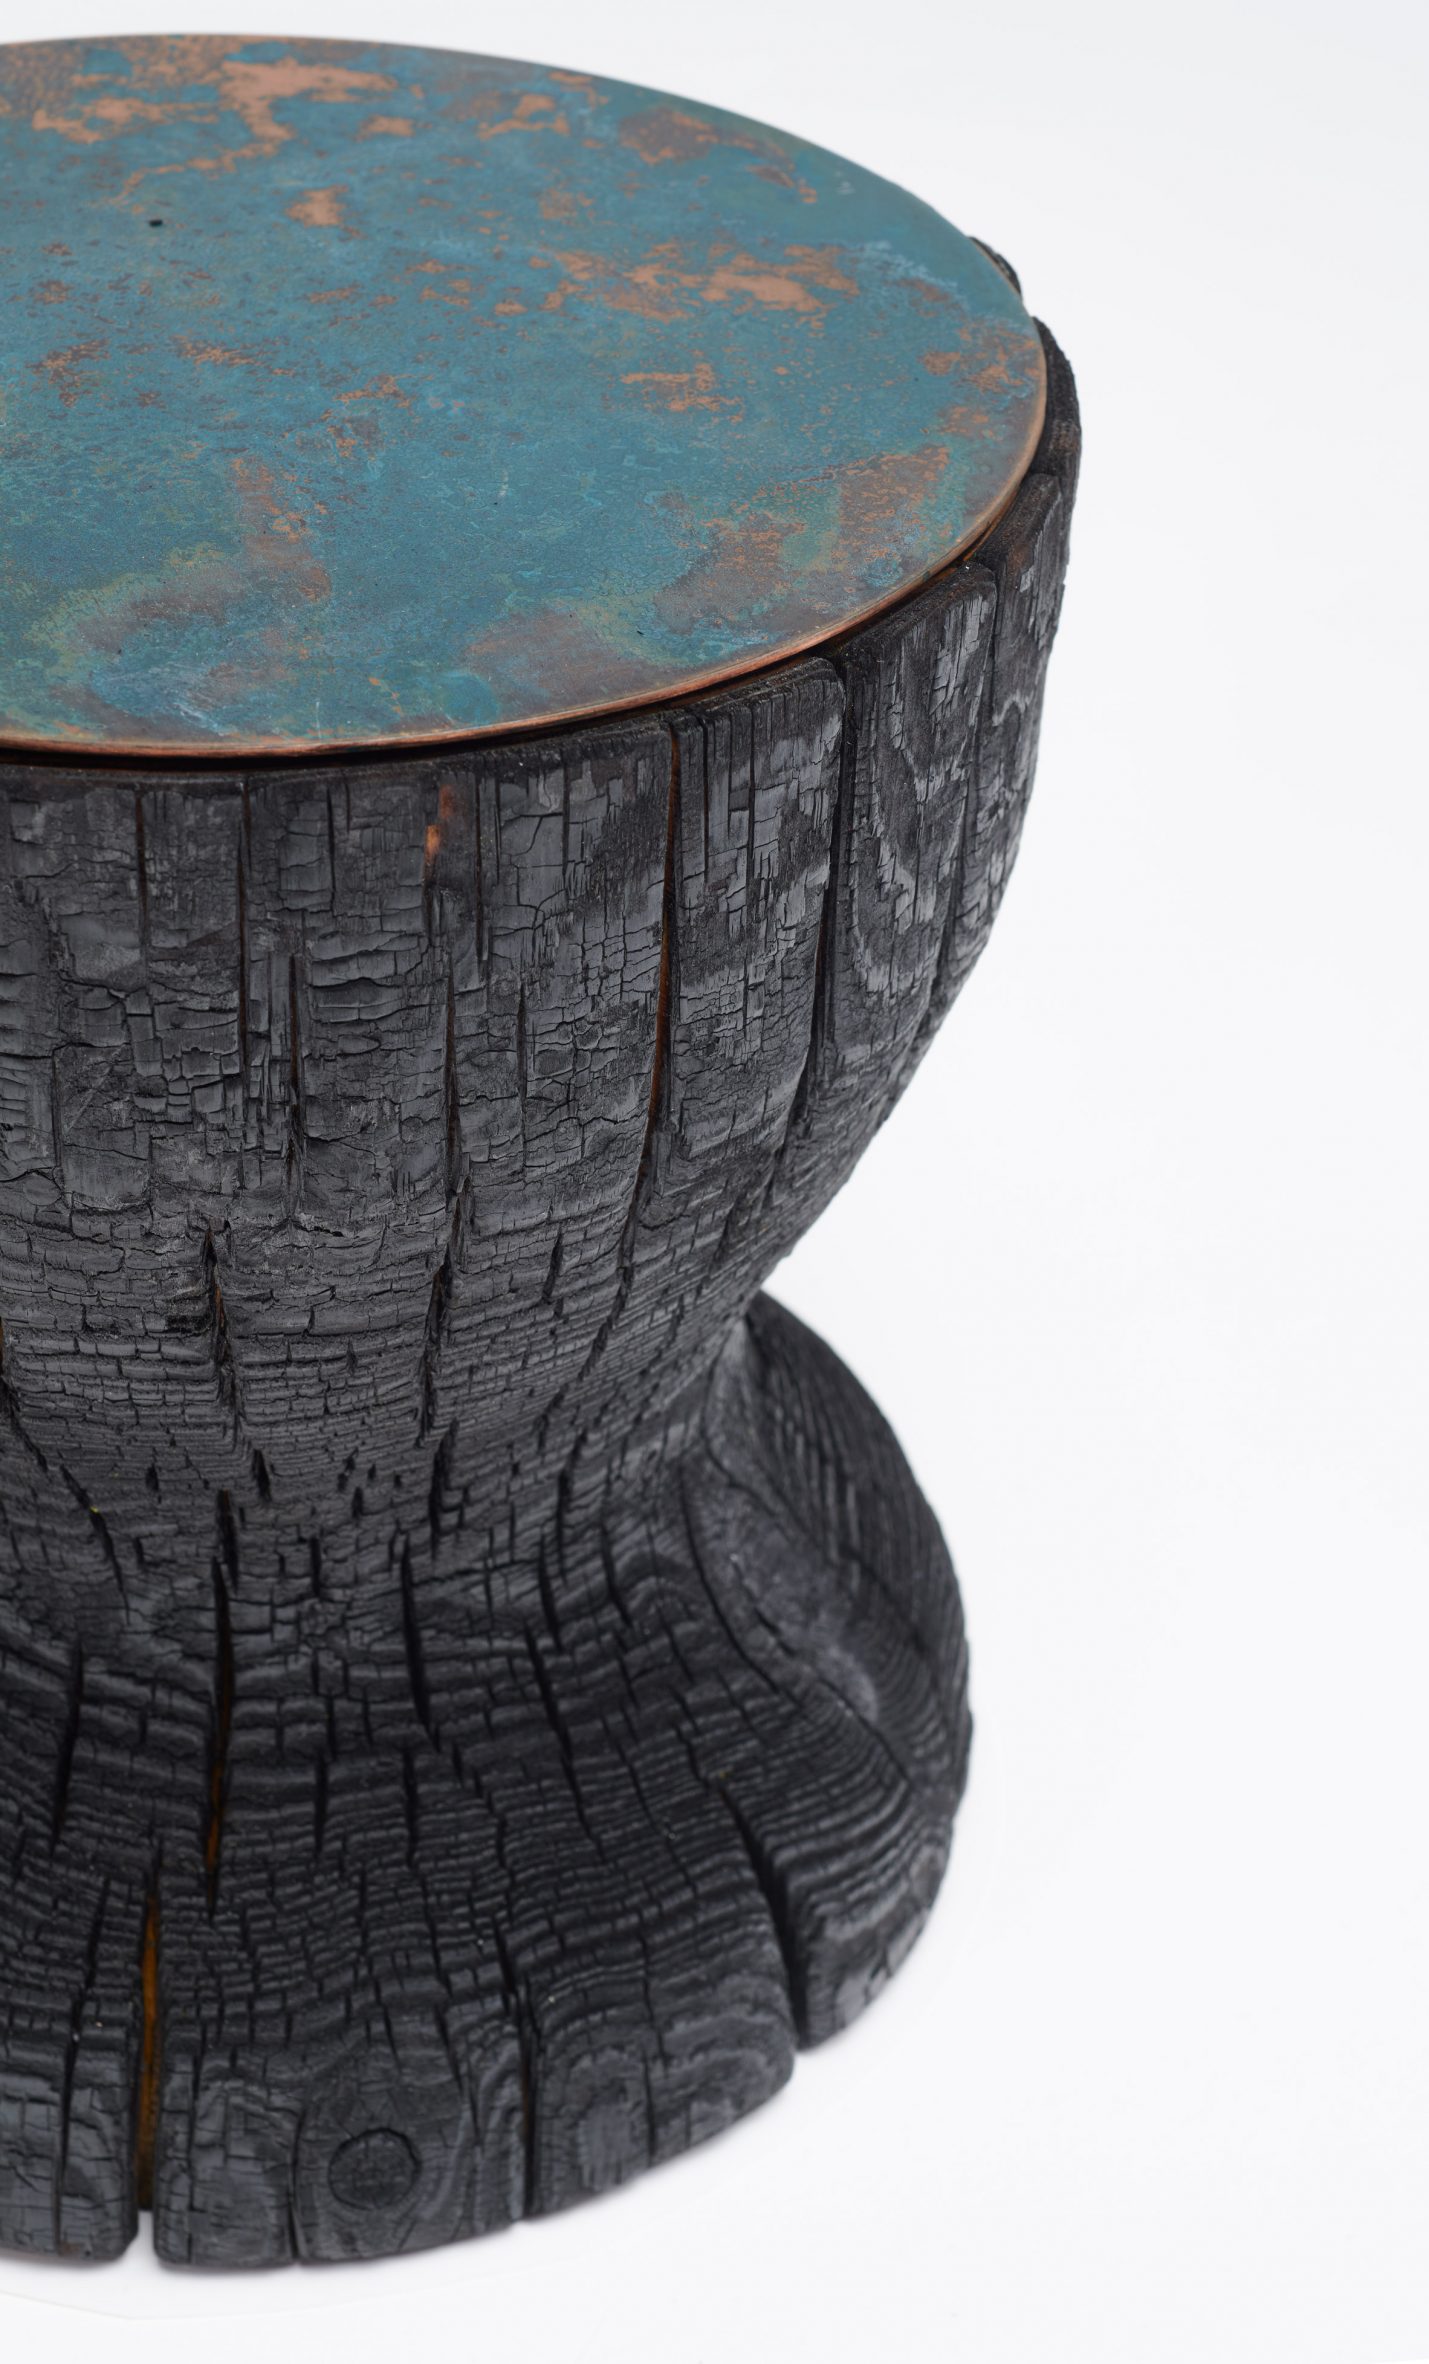 A blackened wood stool with a blue metal top by a New Designers winner